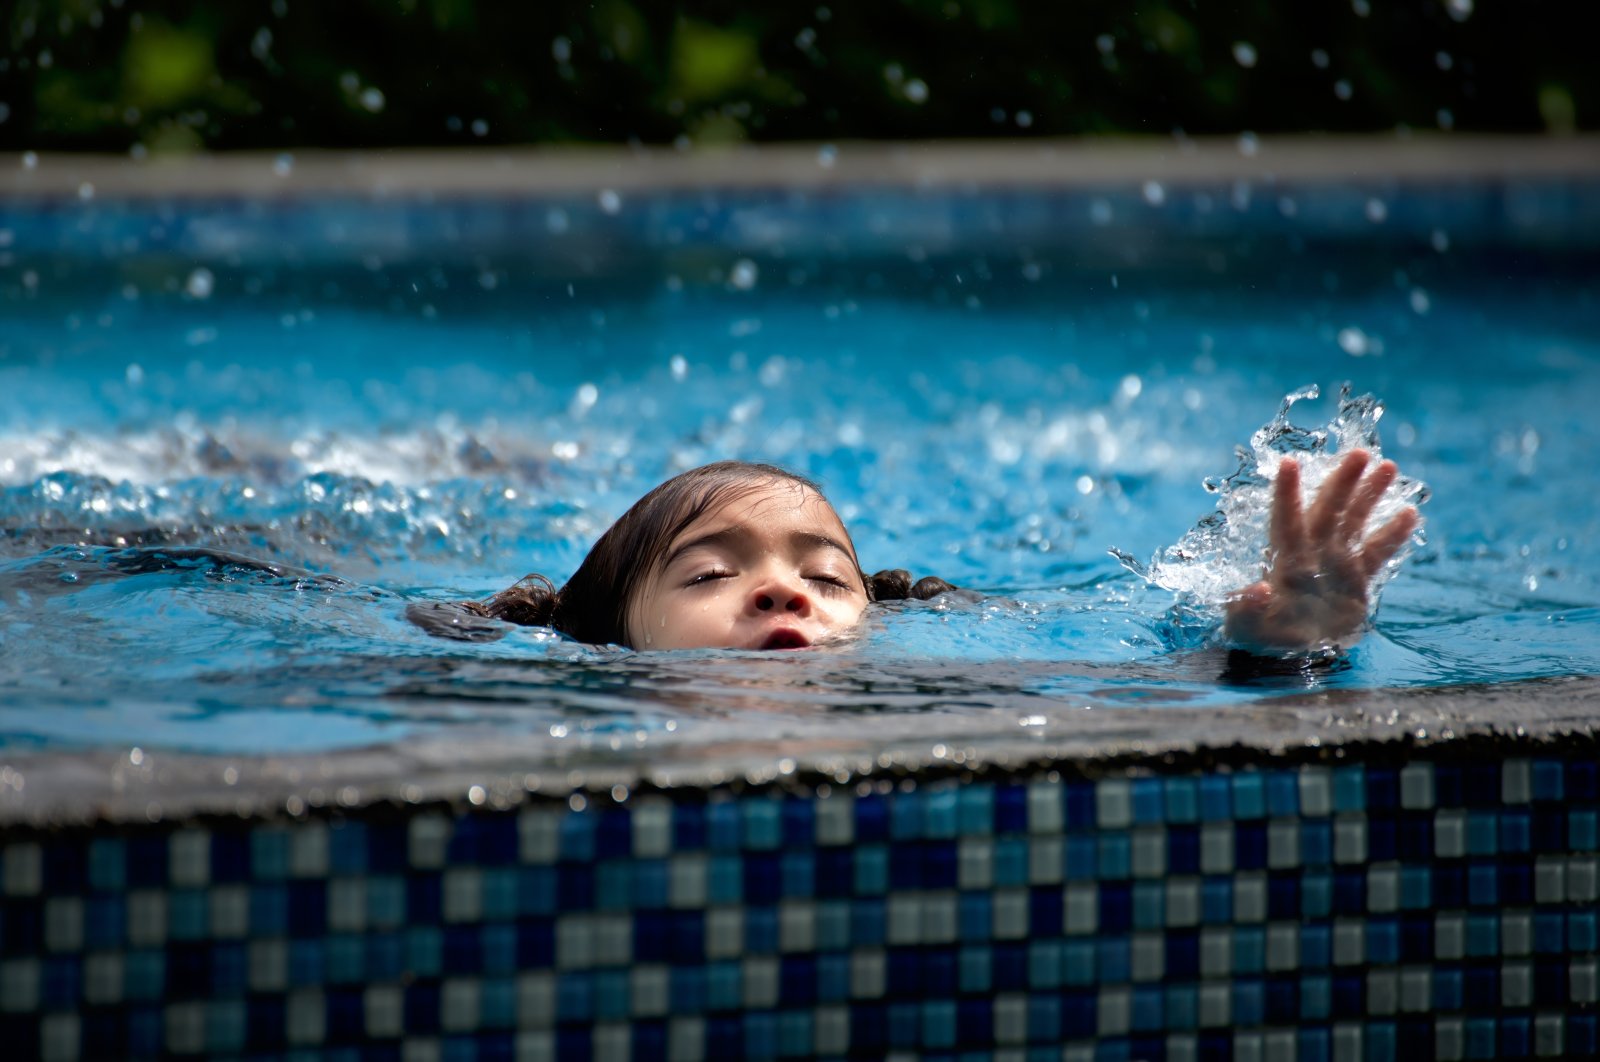 Drowning is one of the leading causes of death globally for children and young people ages 1–24. (Shutterstock)